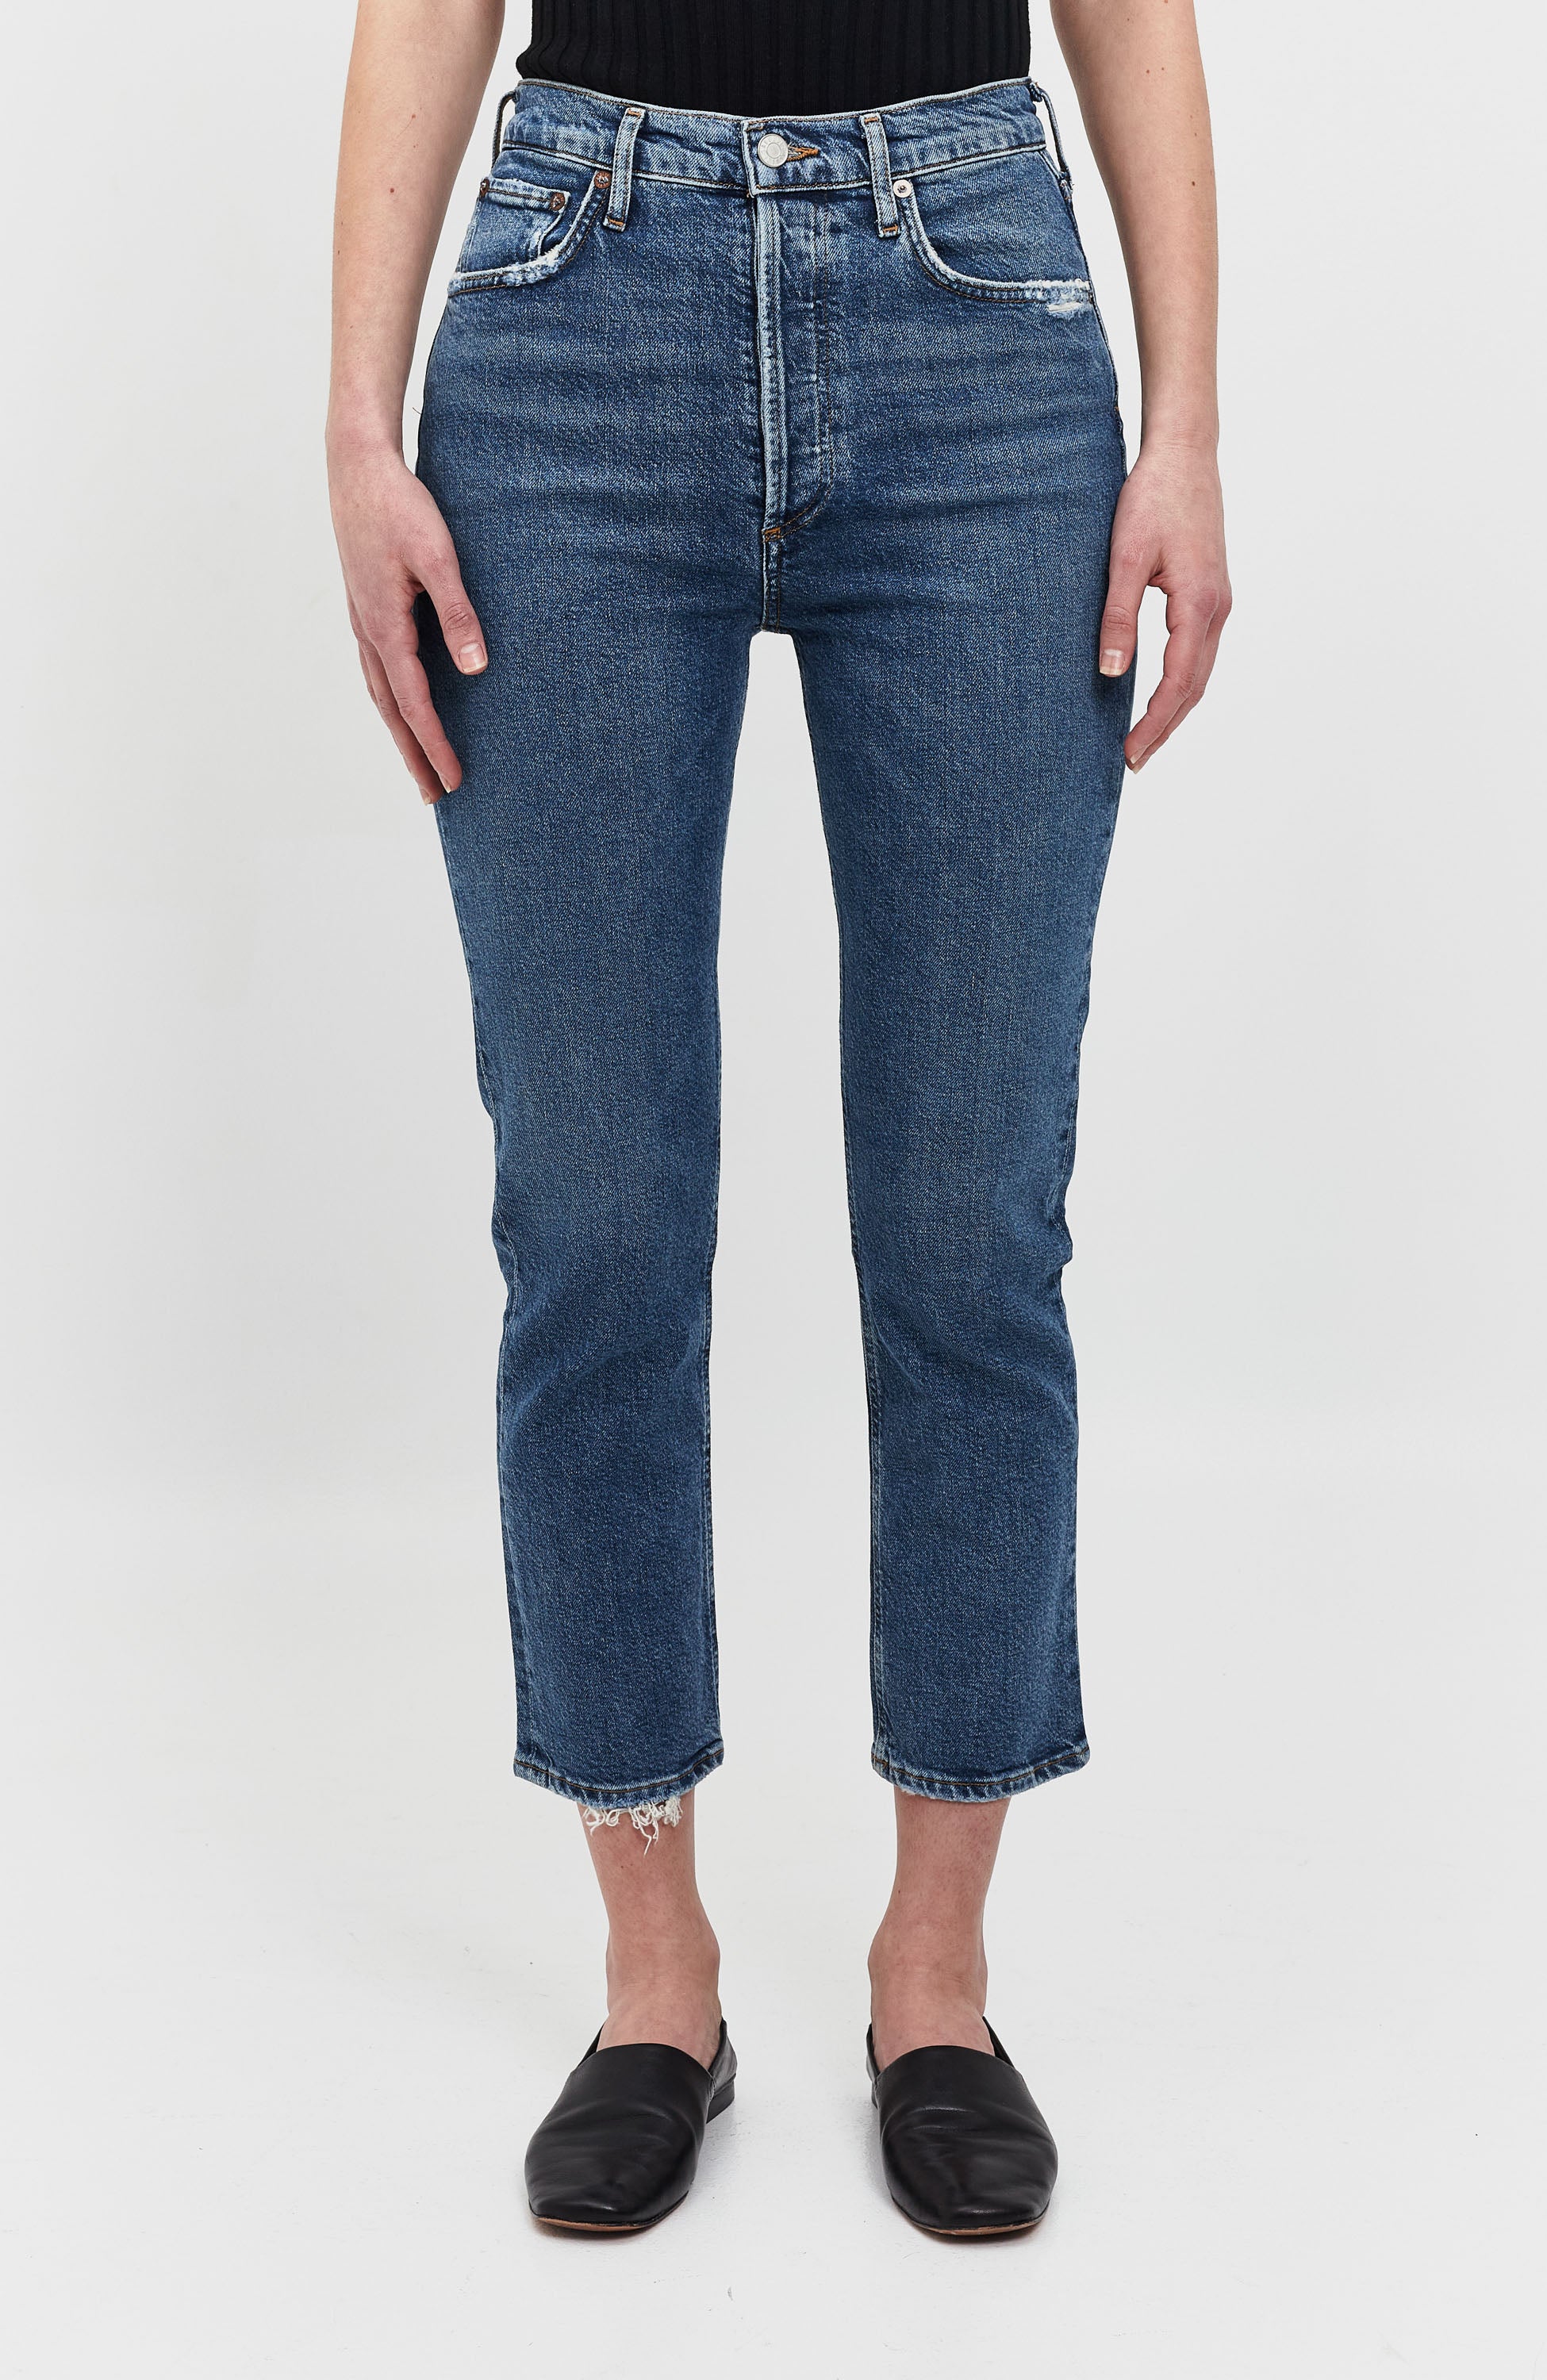 French Connection Kalypso Comfort Kick Flare Jeans, Mid Indigo at